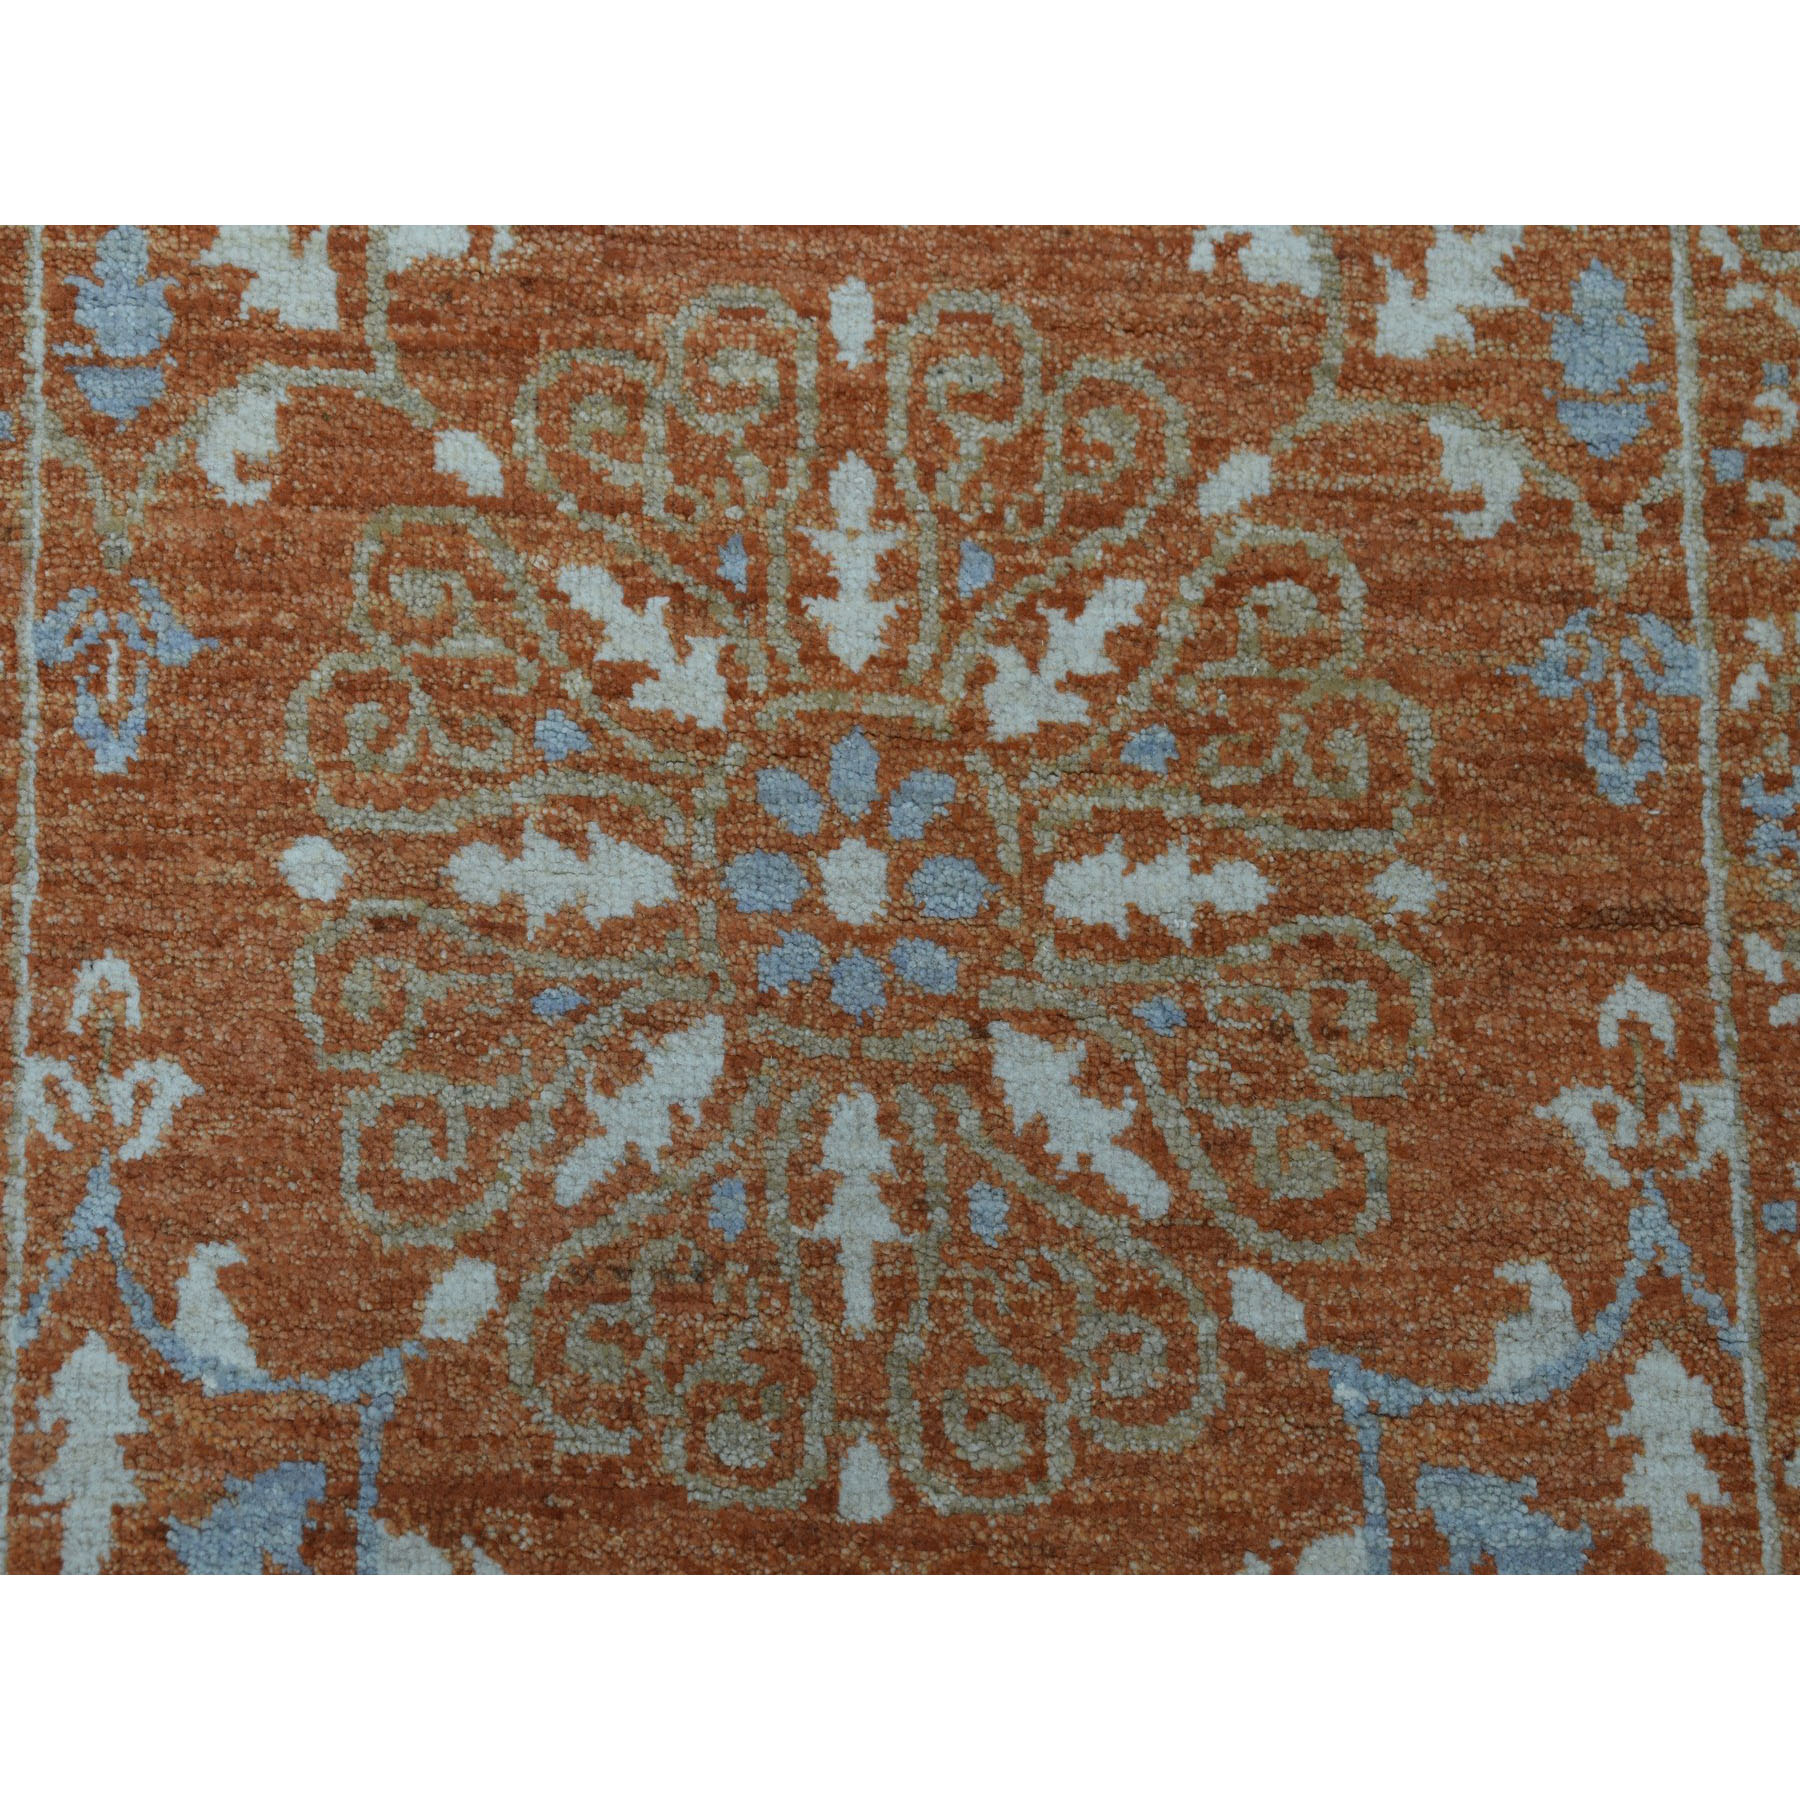 2-6 x14-8  Coral Pure Wool Peshawar XL Runner Hand-Knotted Oriental Rug 